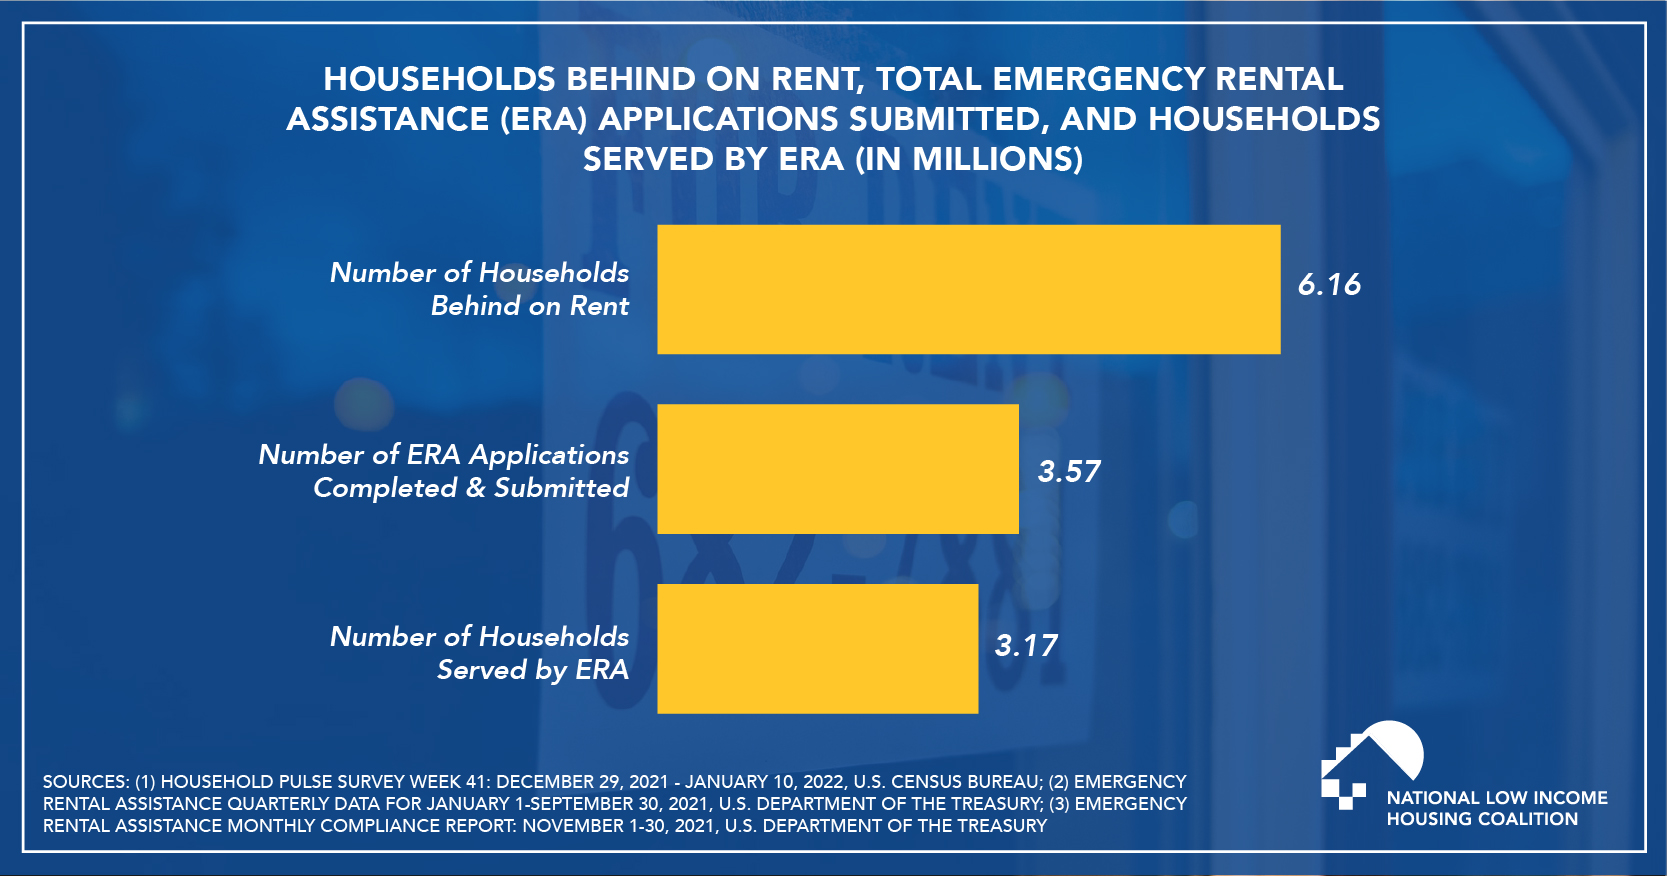 NLIHC Fact of the Week – Households Behind on Rent, Total Emergency Rental Assistance (ERA) Applications Submitted, and Households